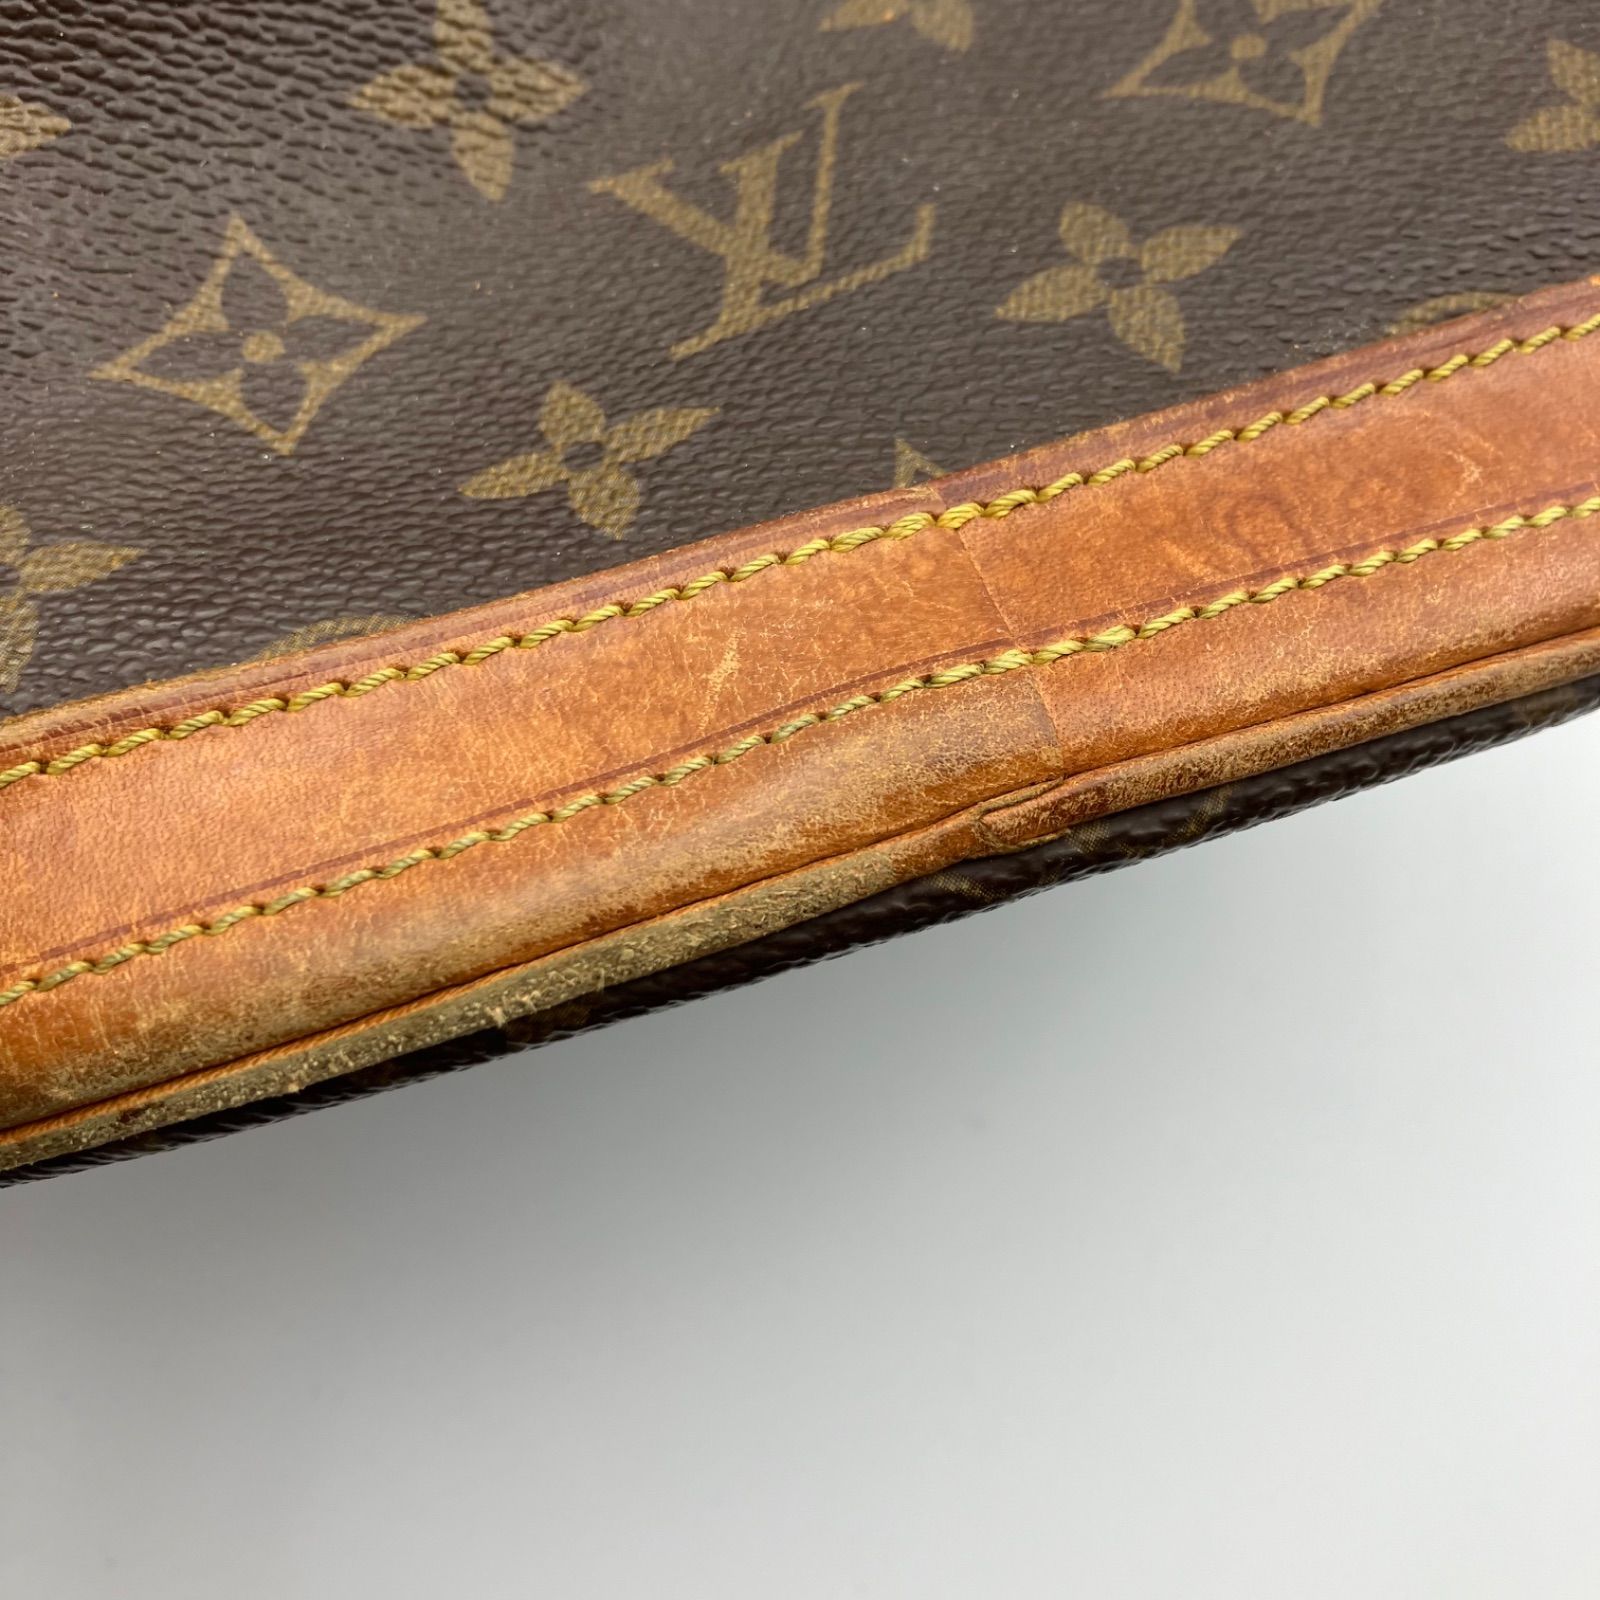 LOUIS VUITTON ルイヴィトン プチ バケット PM モノグラム キャンバス ...